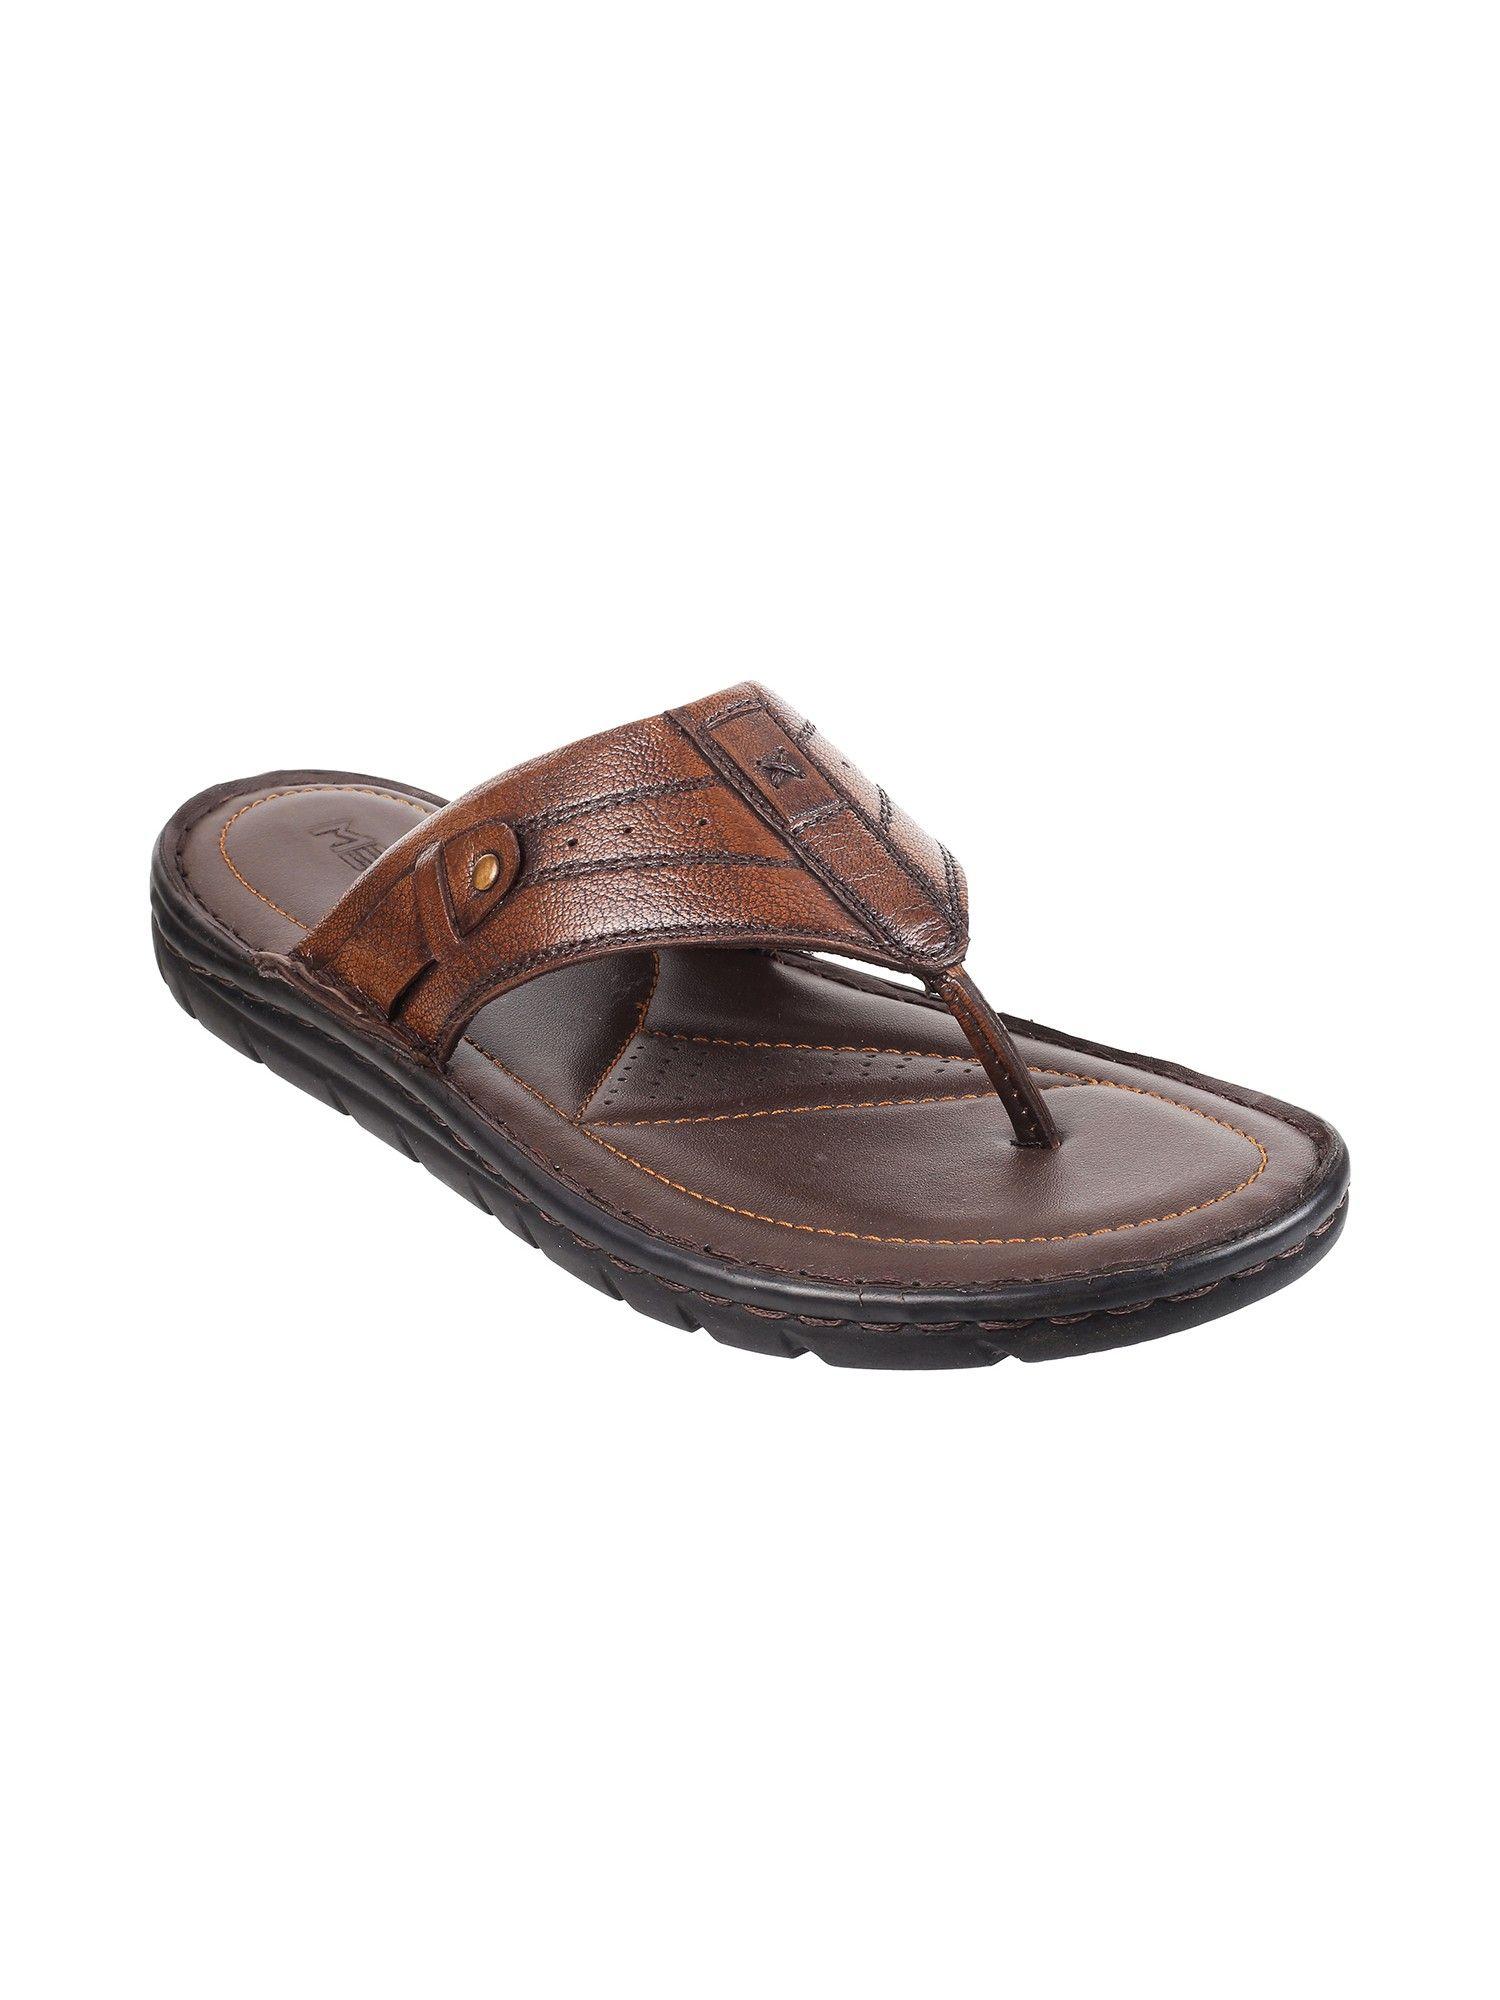 mens-brown-flat-chappalsmetro-mens-brown-leather-solid-plain-sliders